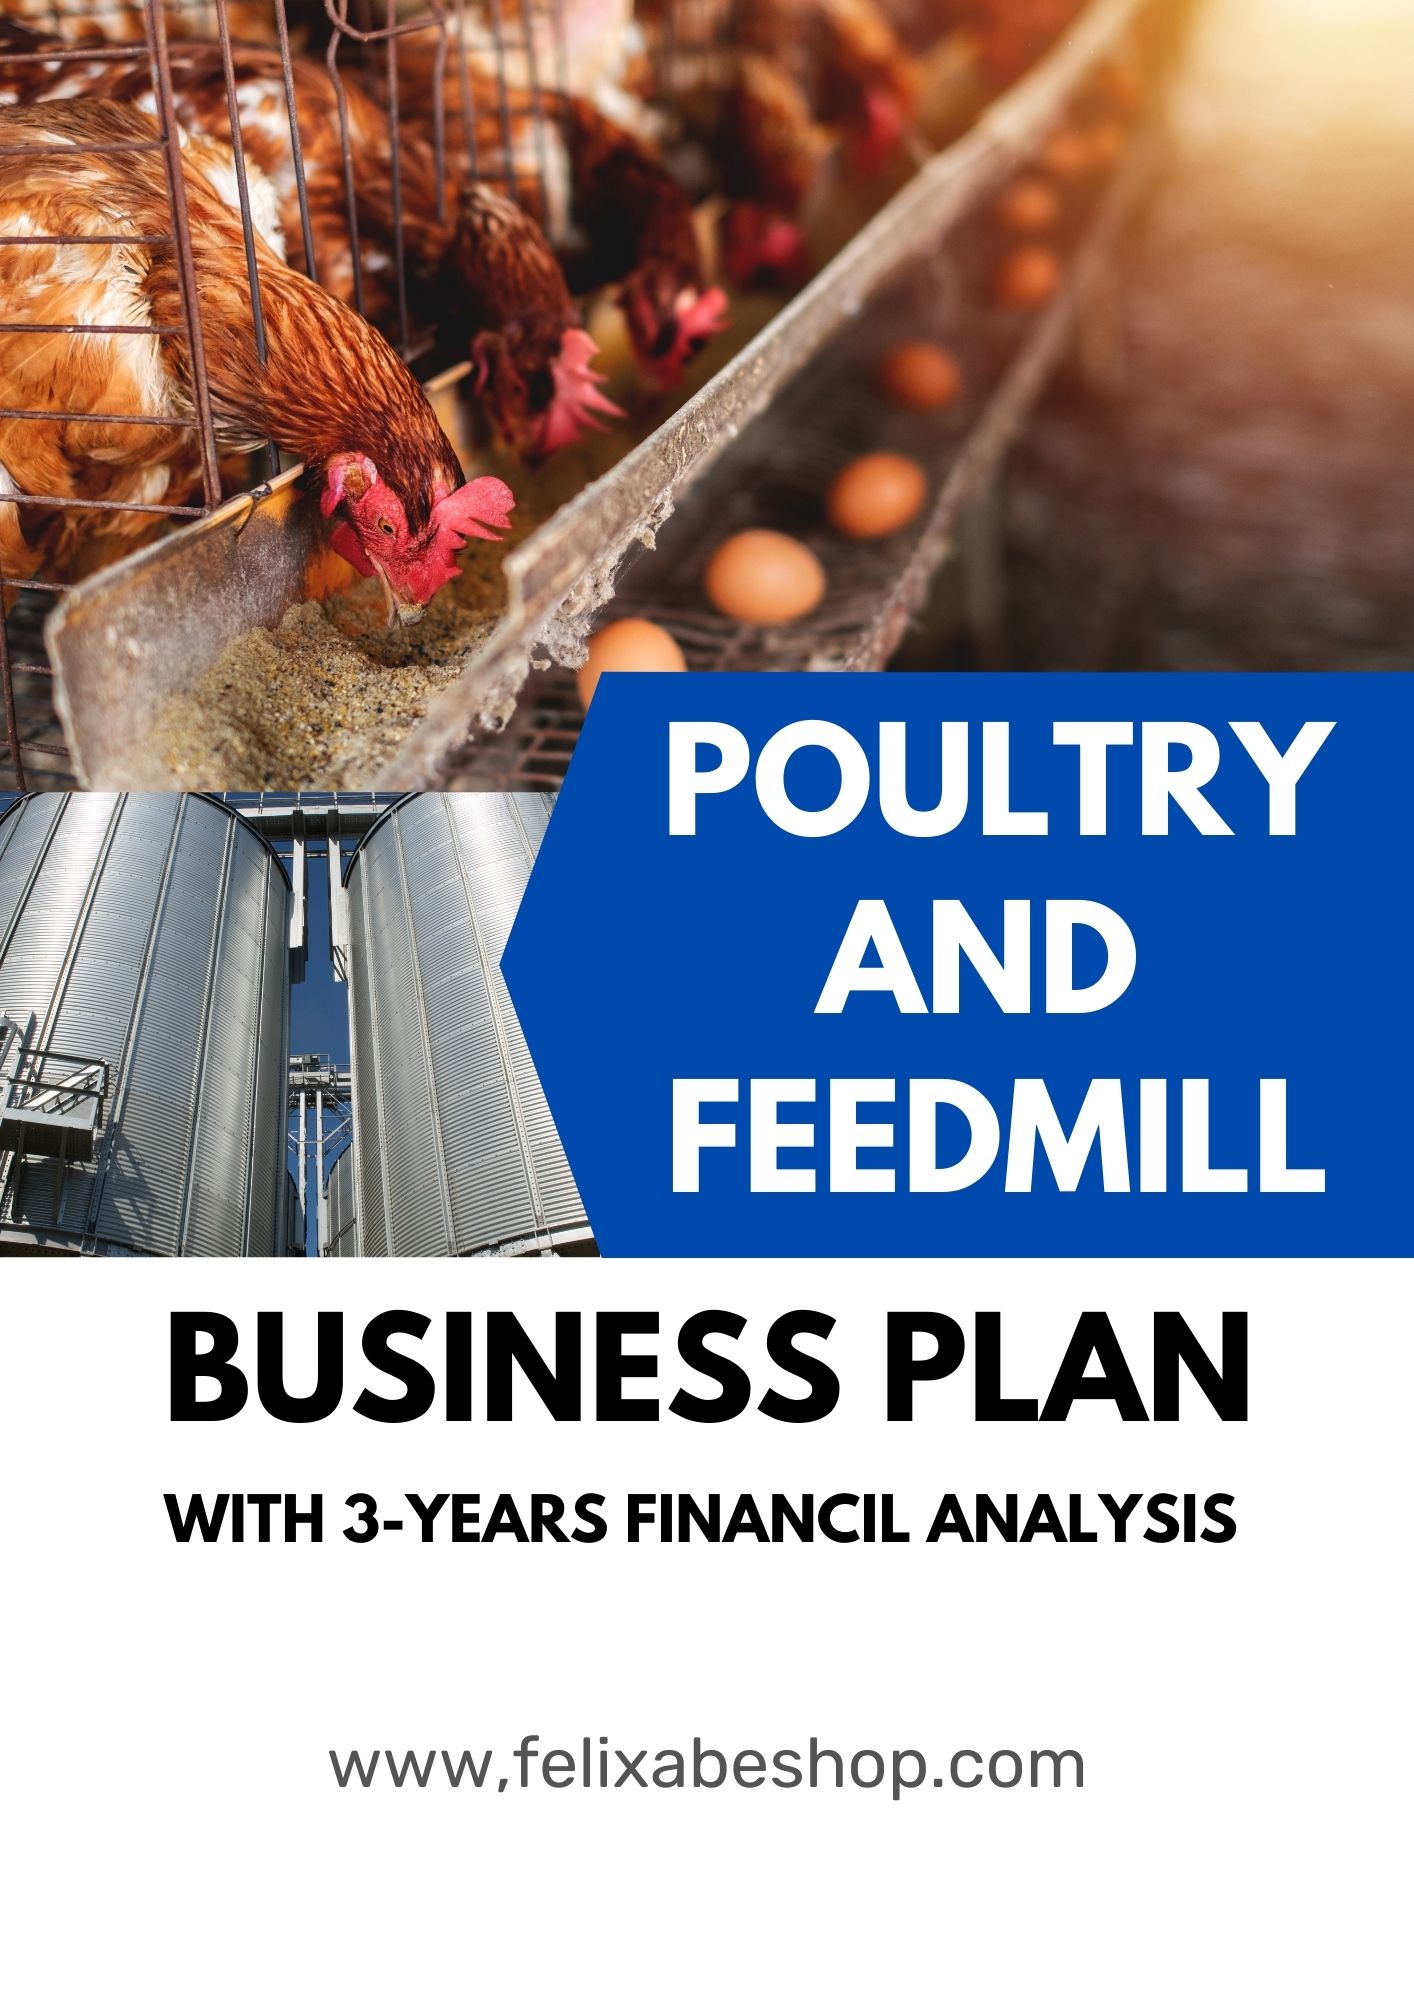 business plan on poultry